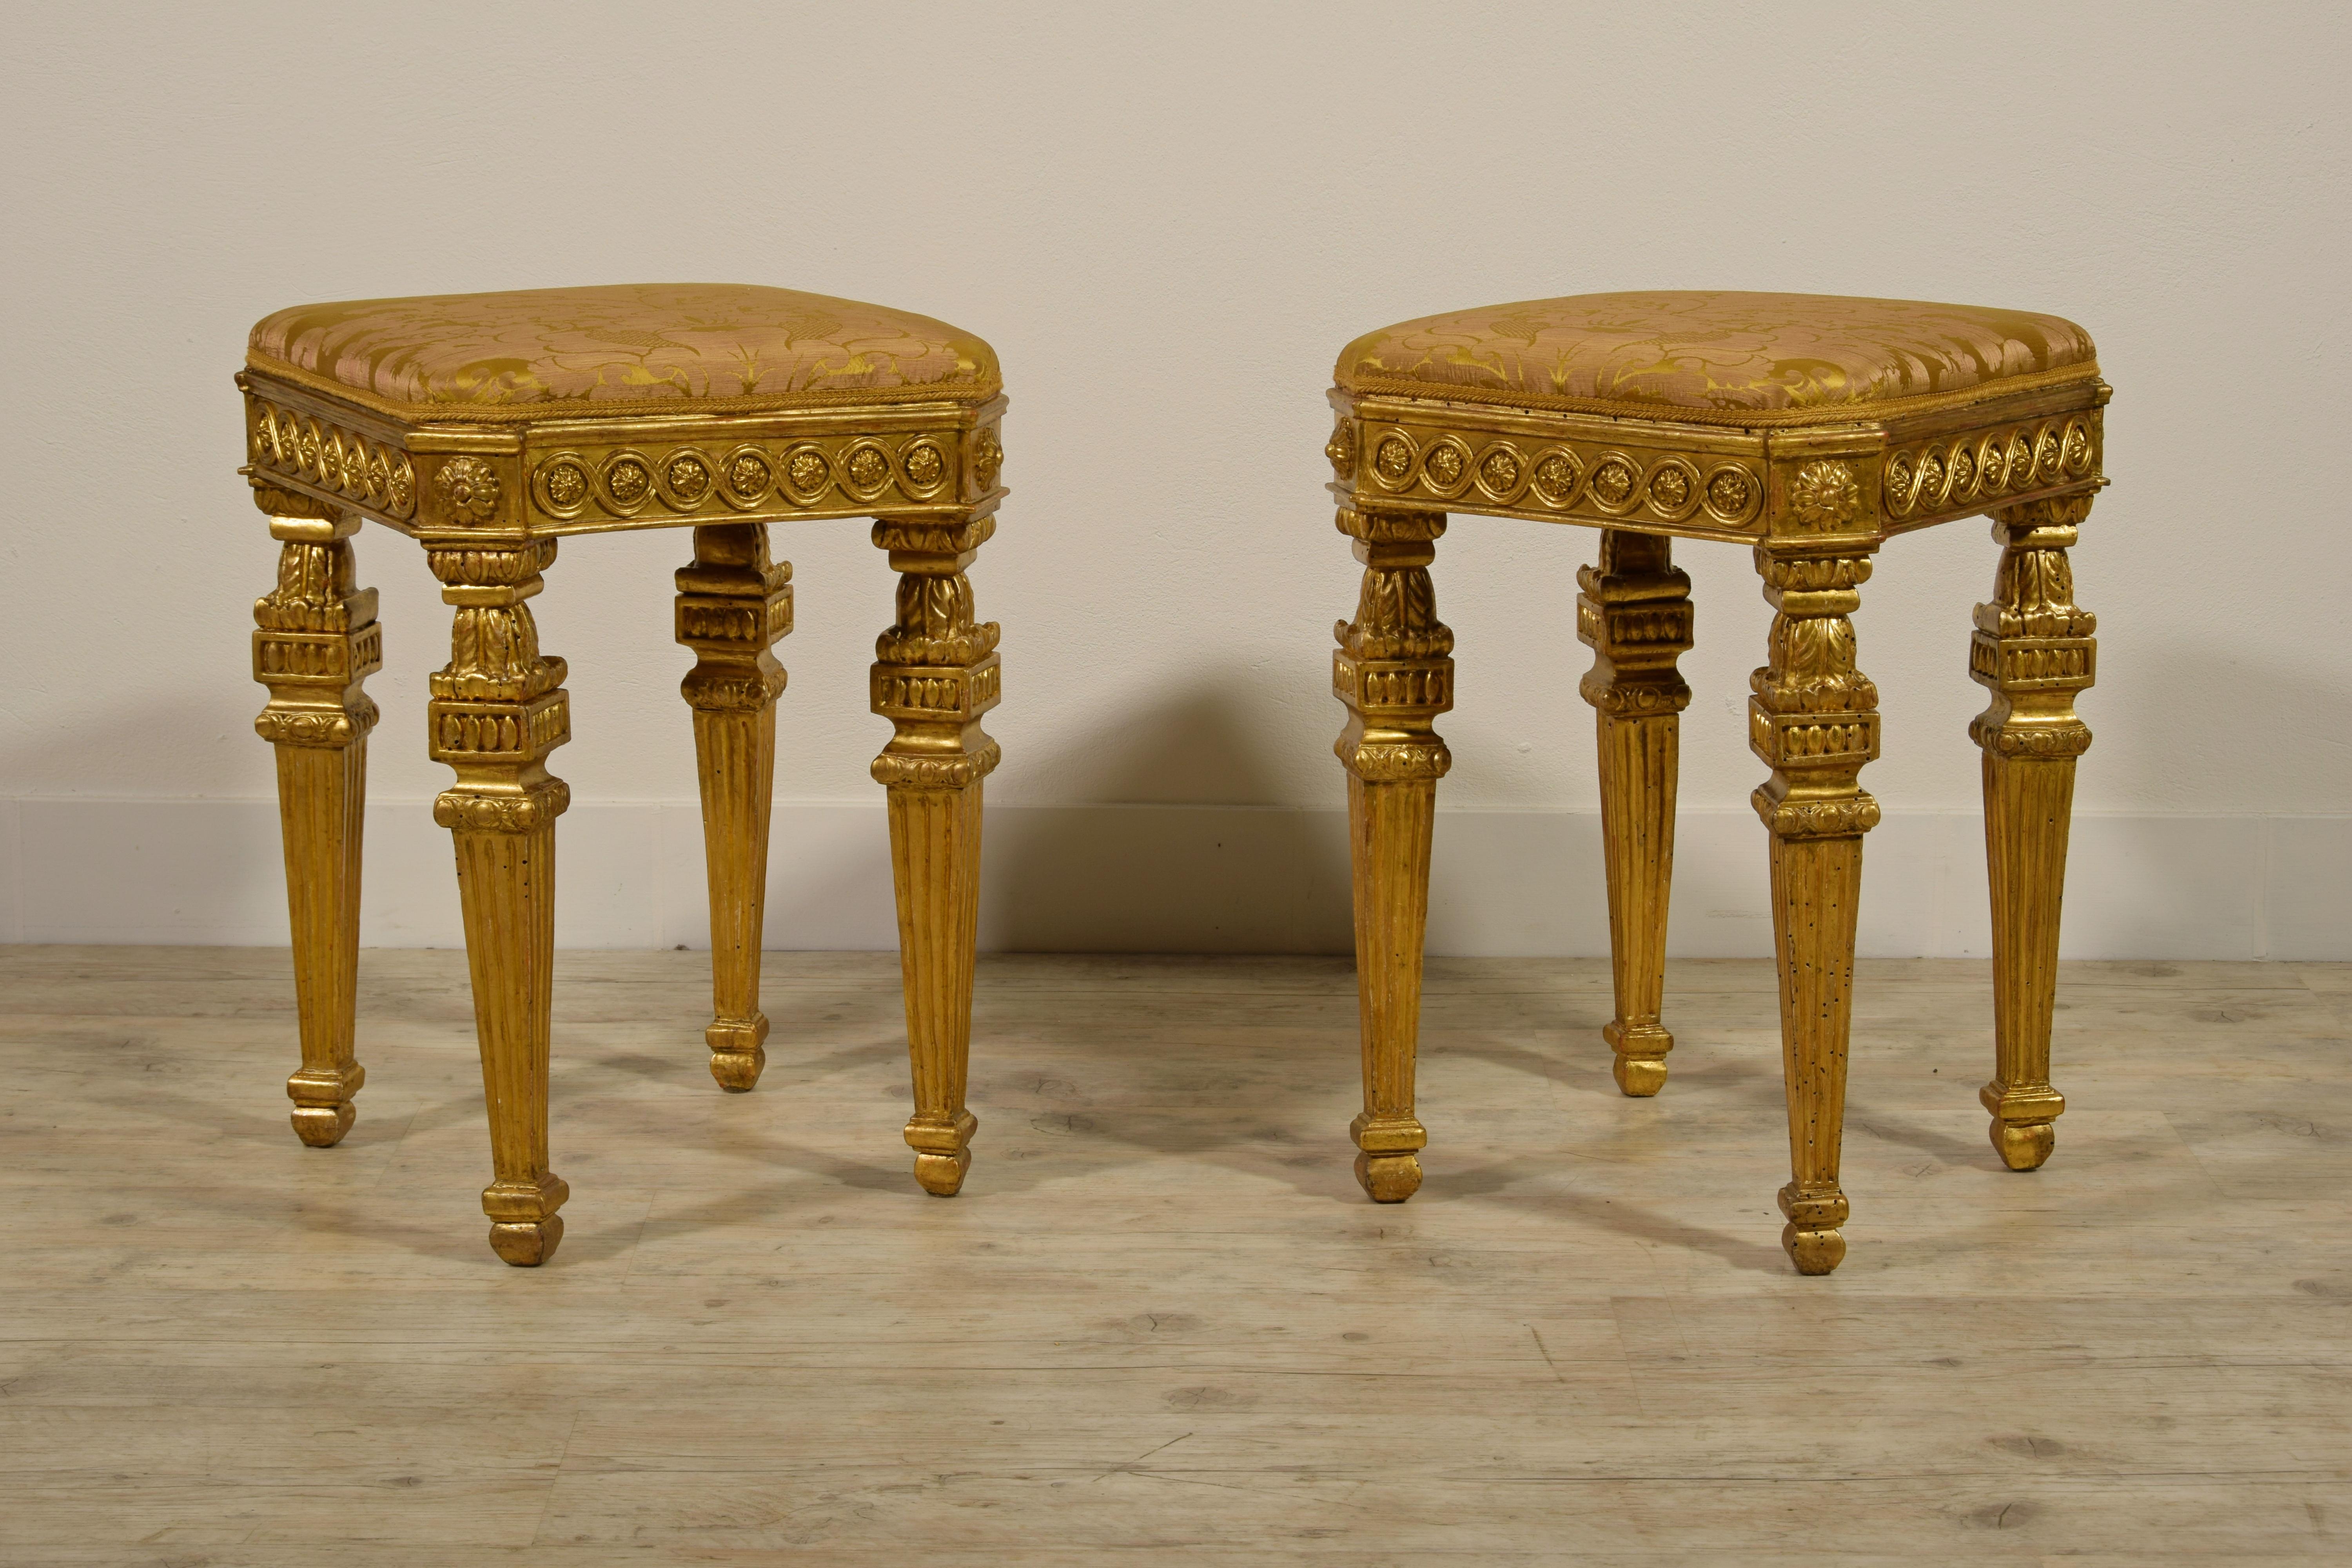 18th century pair of Italian neoclassical giltwood stools 

The fine pair of neoclassical stools, made in Sicily, Italy, in the second half of the eighteenth century, consists of a wooden structure finely carved and gilded. The seat, lined in